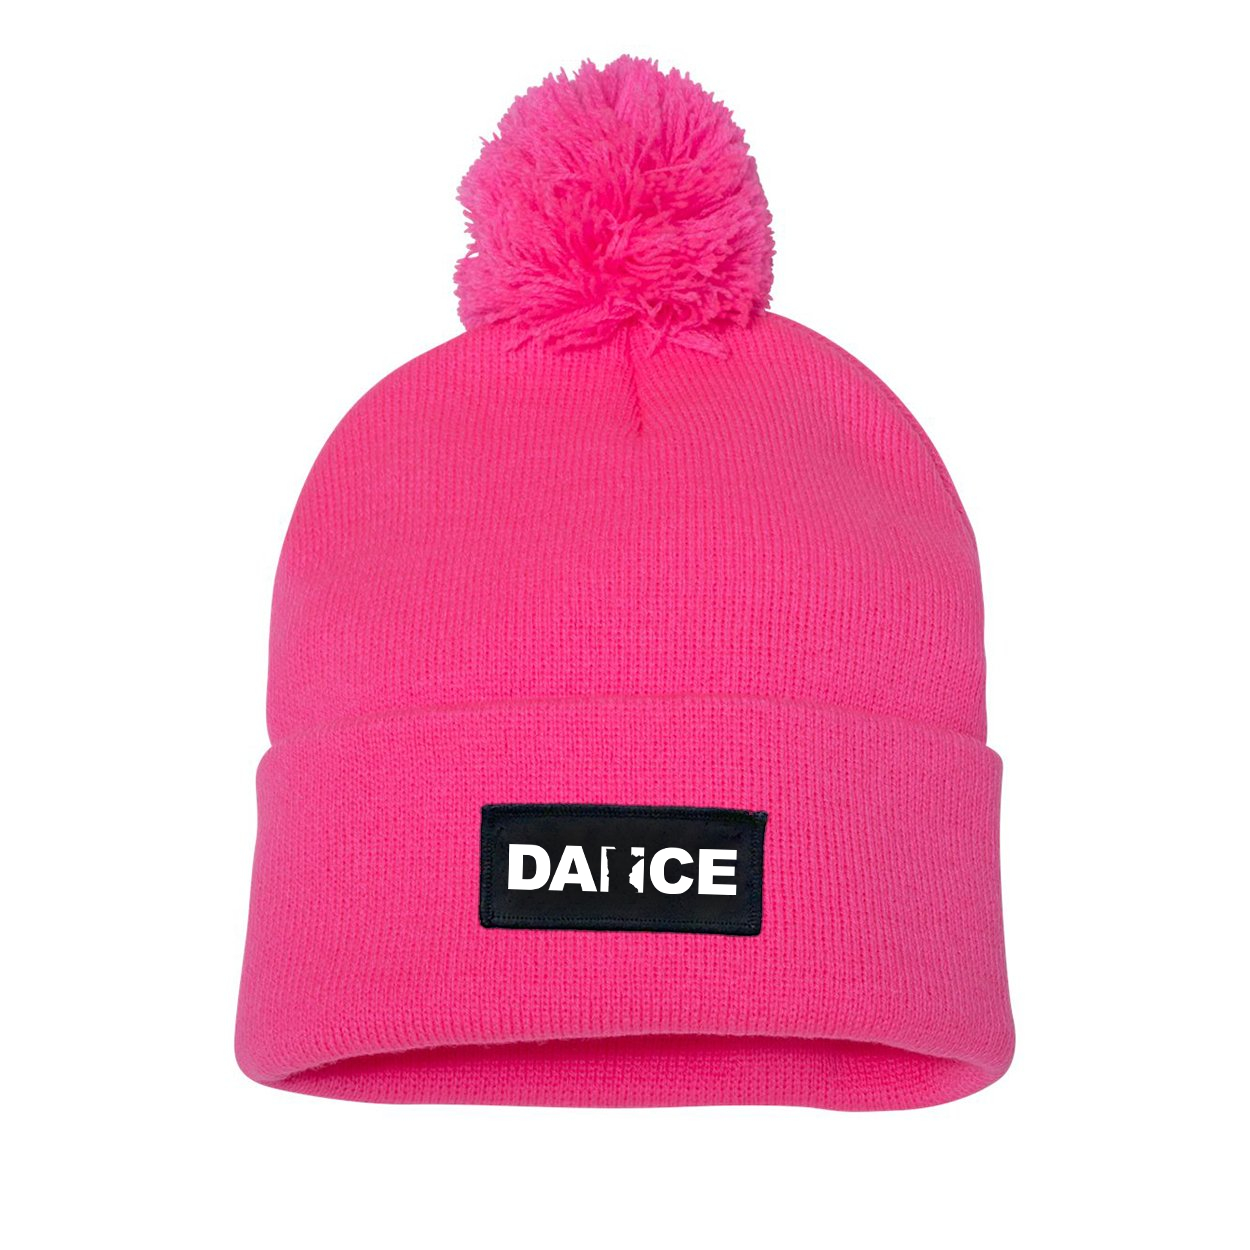 Dance Minnesota Night Out Woven Patch Roll Up Pom Knit Beanie Pink (White Logo)